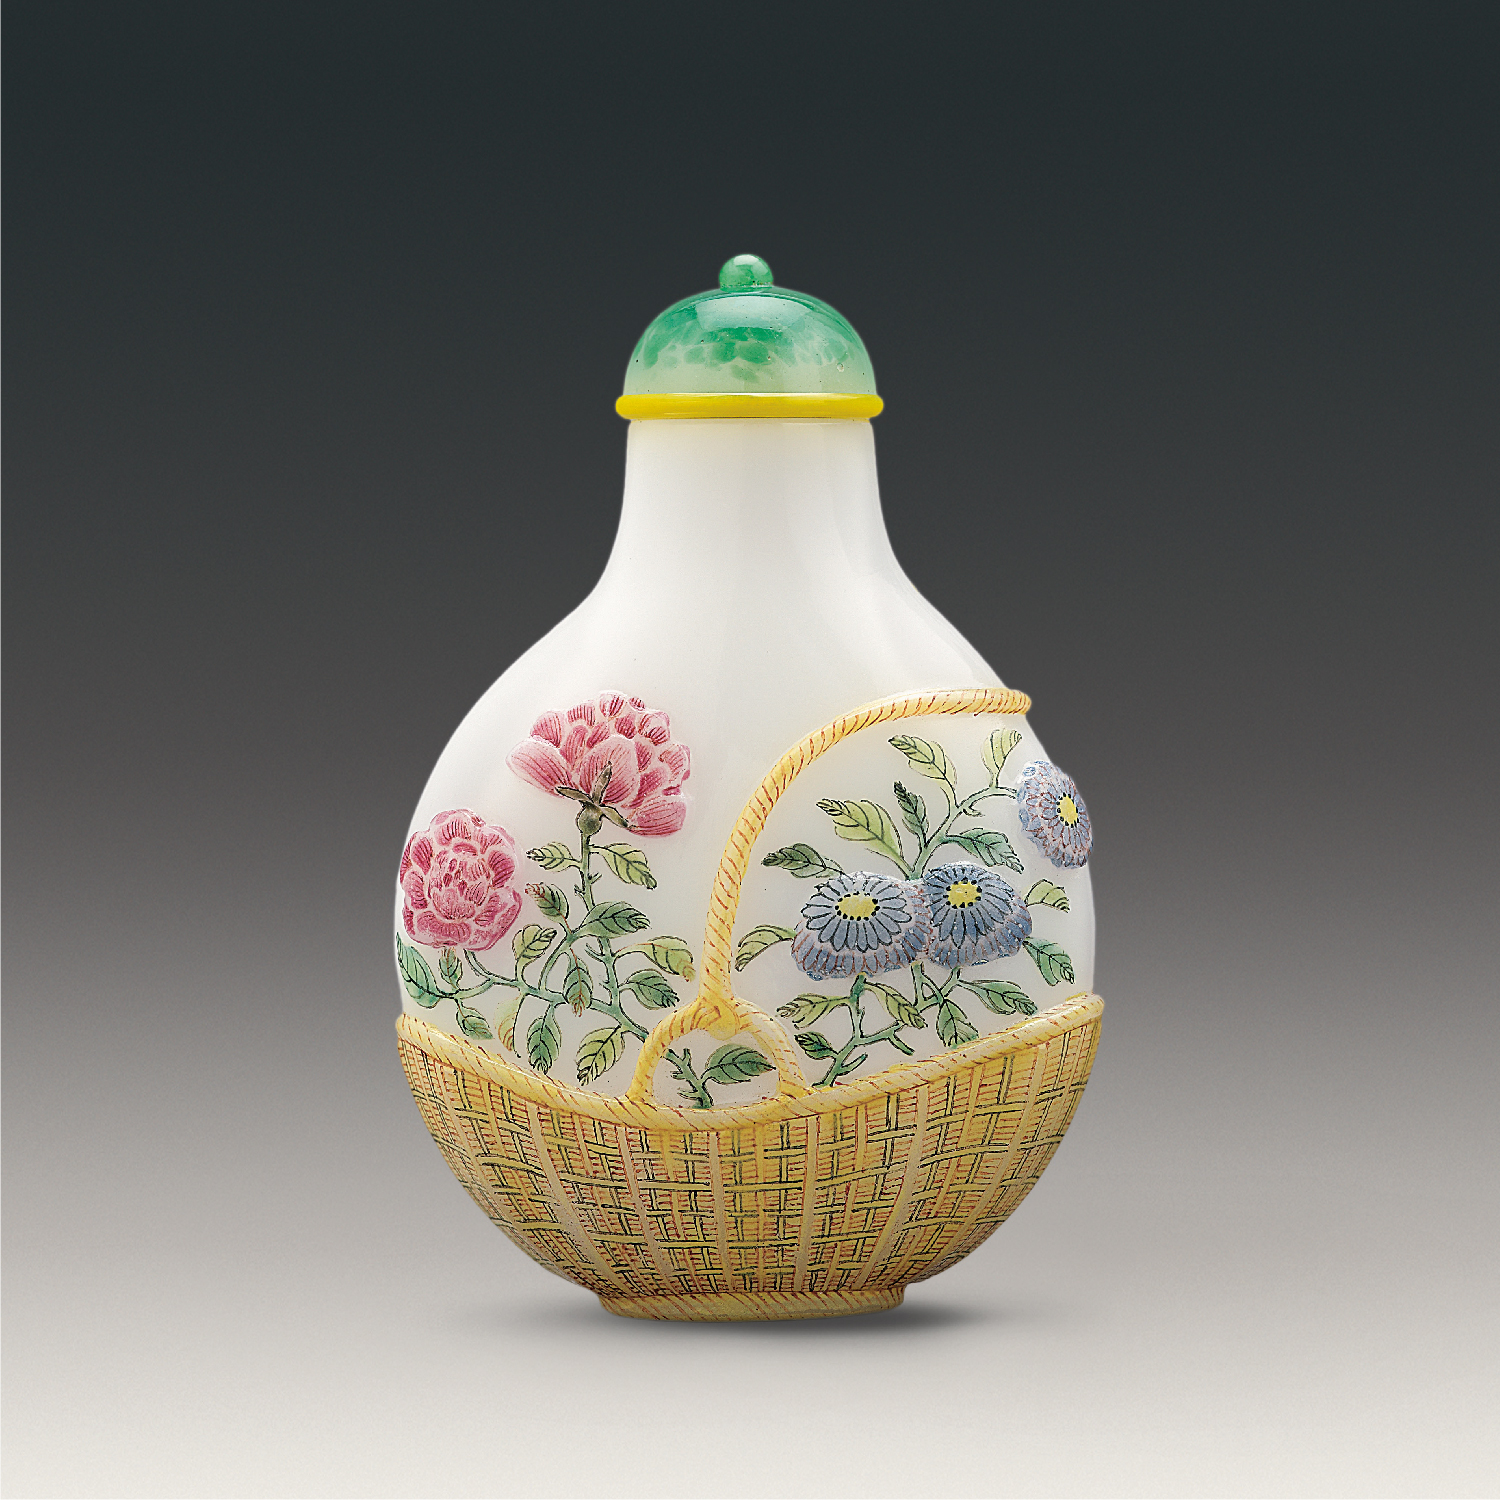 Snuff bottle with flower basket design in painted enamels on white ground in relief